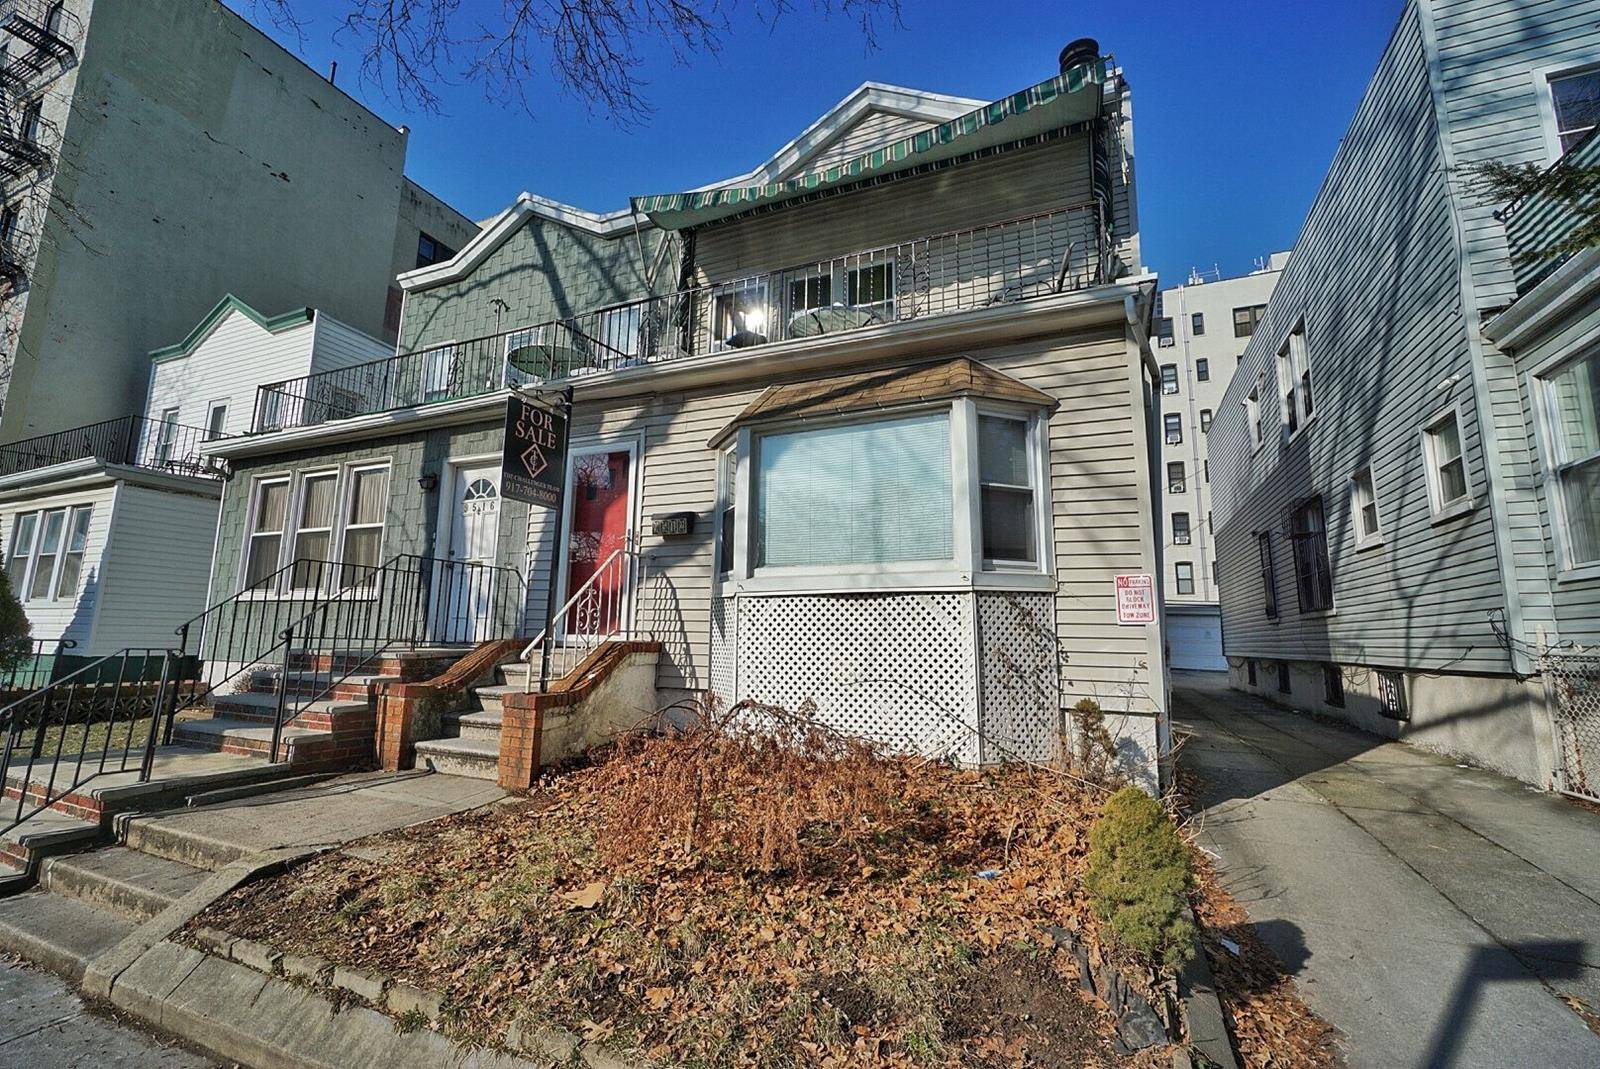 AMAZING OPPORTUNITY TO OWN A BEAUTIFUL 2 FAMILY HOME SITTING ON A 25'X112' LOT IN BAY RIDGE.